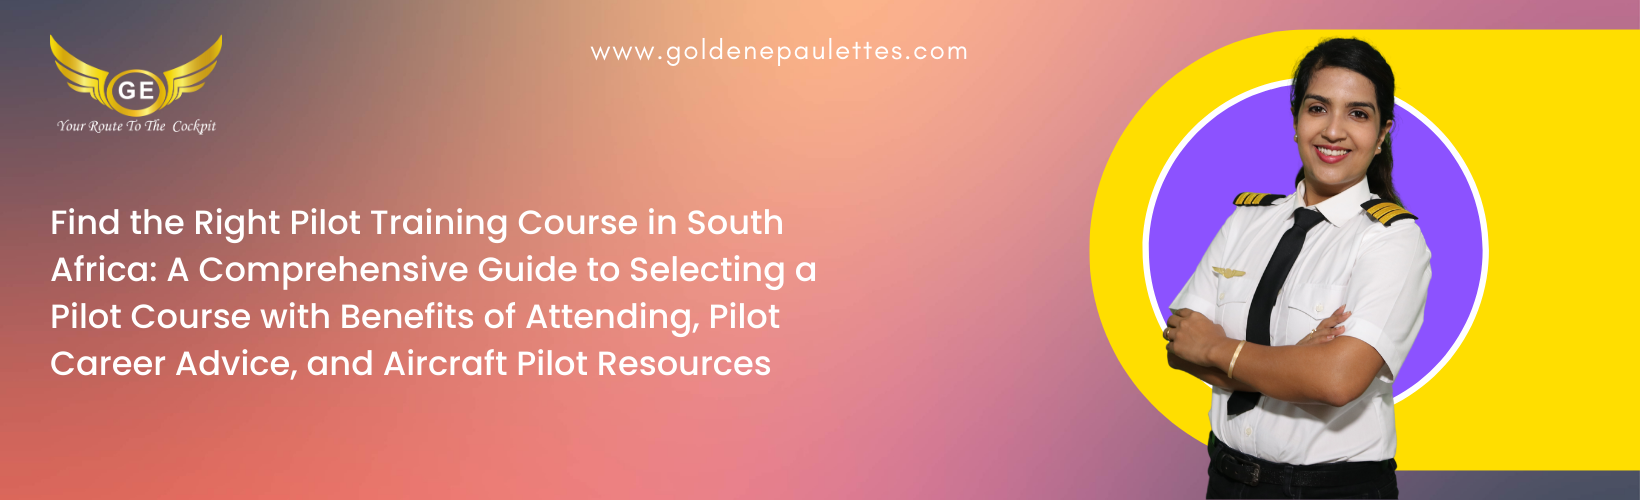 How to Find the Right Pilot Training Course in South Africa